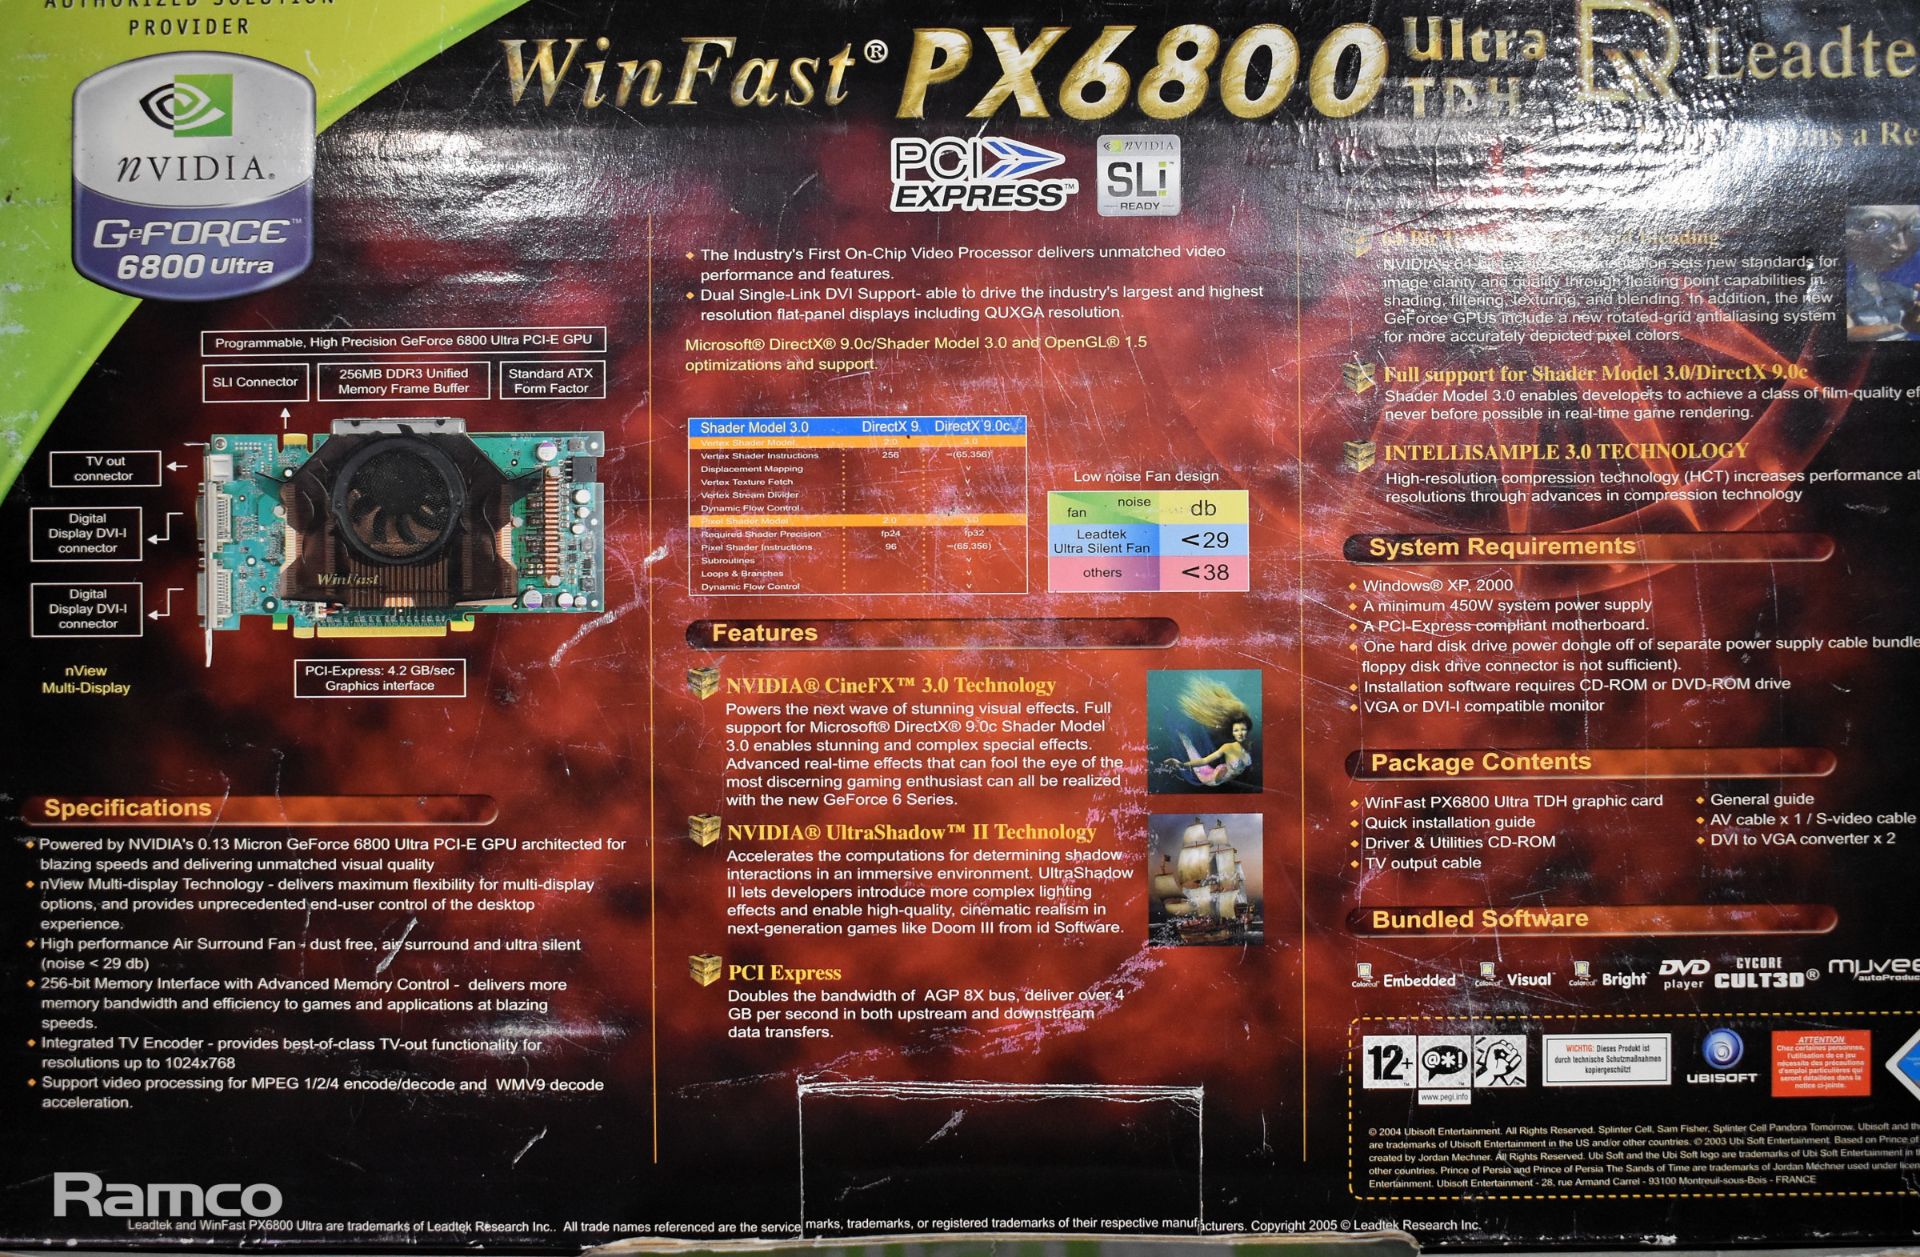 Winfast PX6800 ultra graphics card - Image 4 of 5